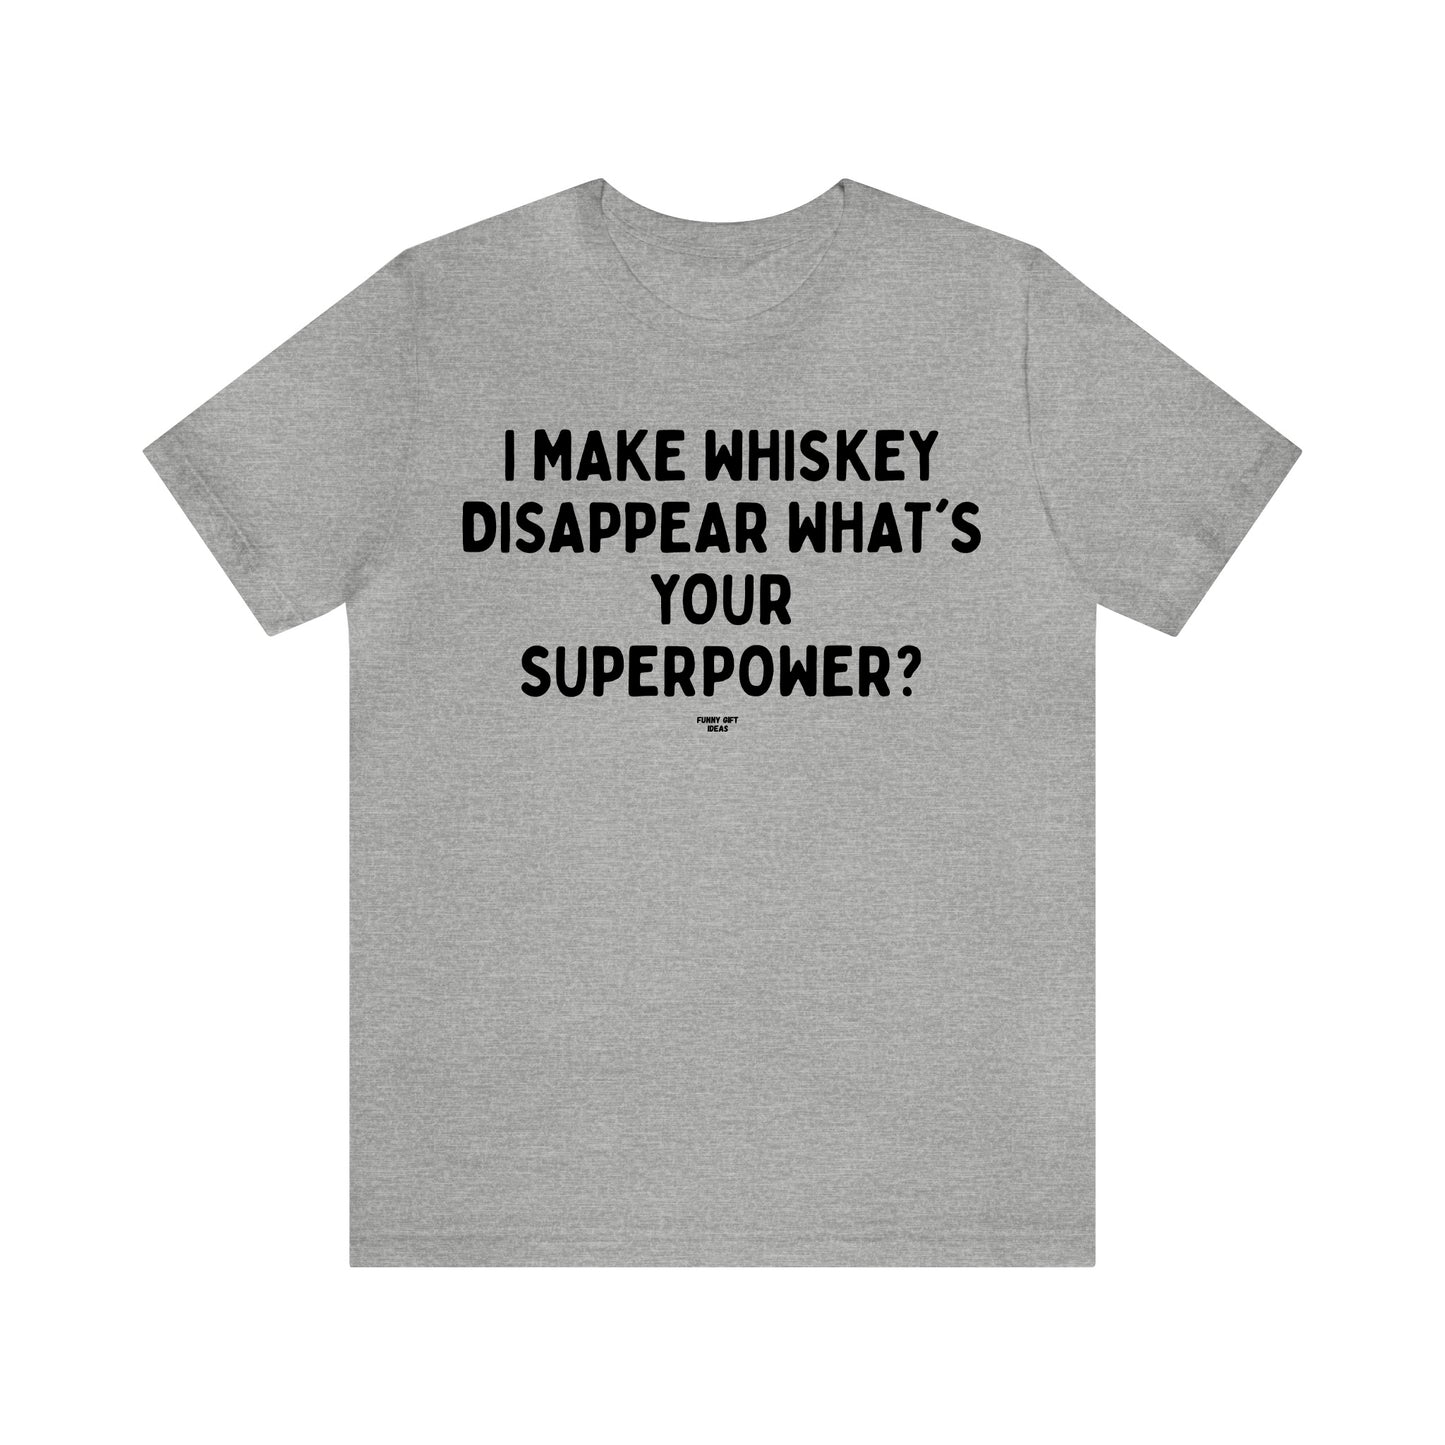 Mens T Shirts - I Make Whiskey Disappear What's Your Superpower? - Funny Men T Shirts